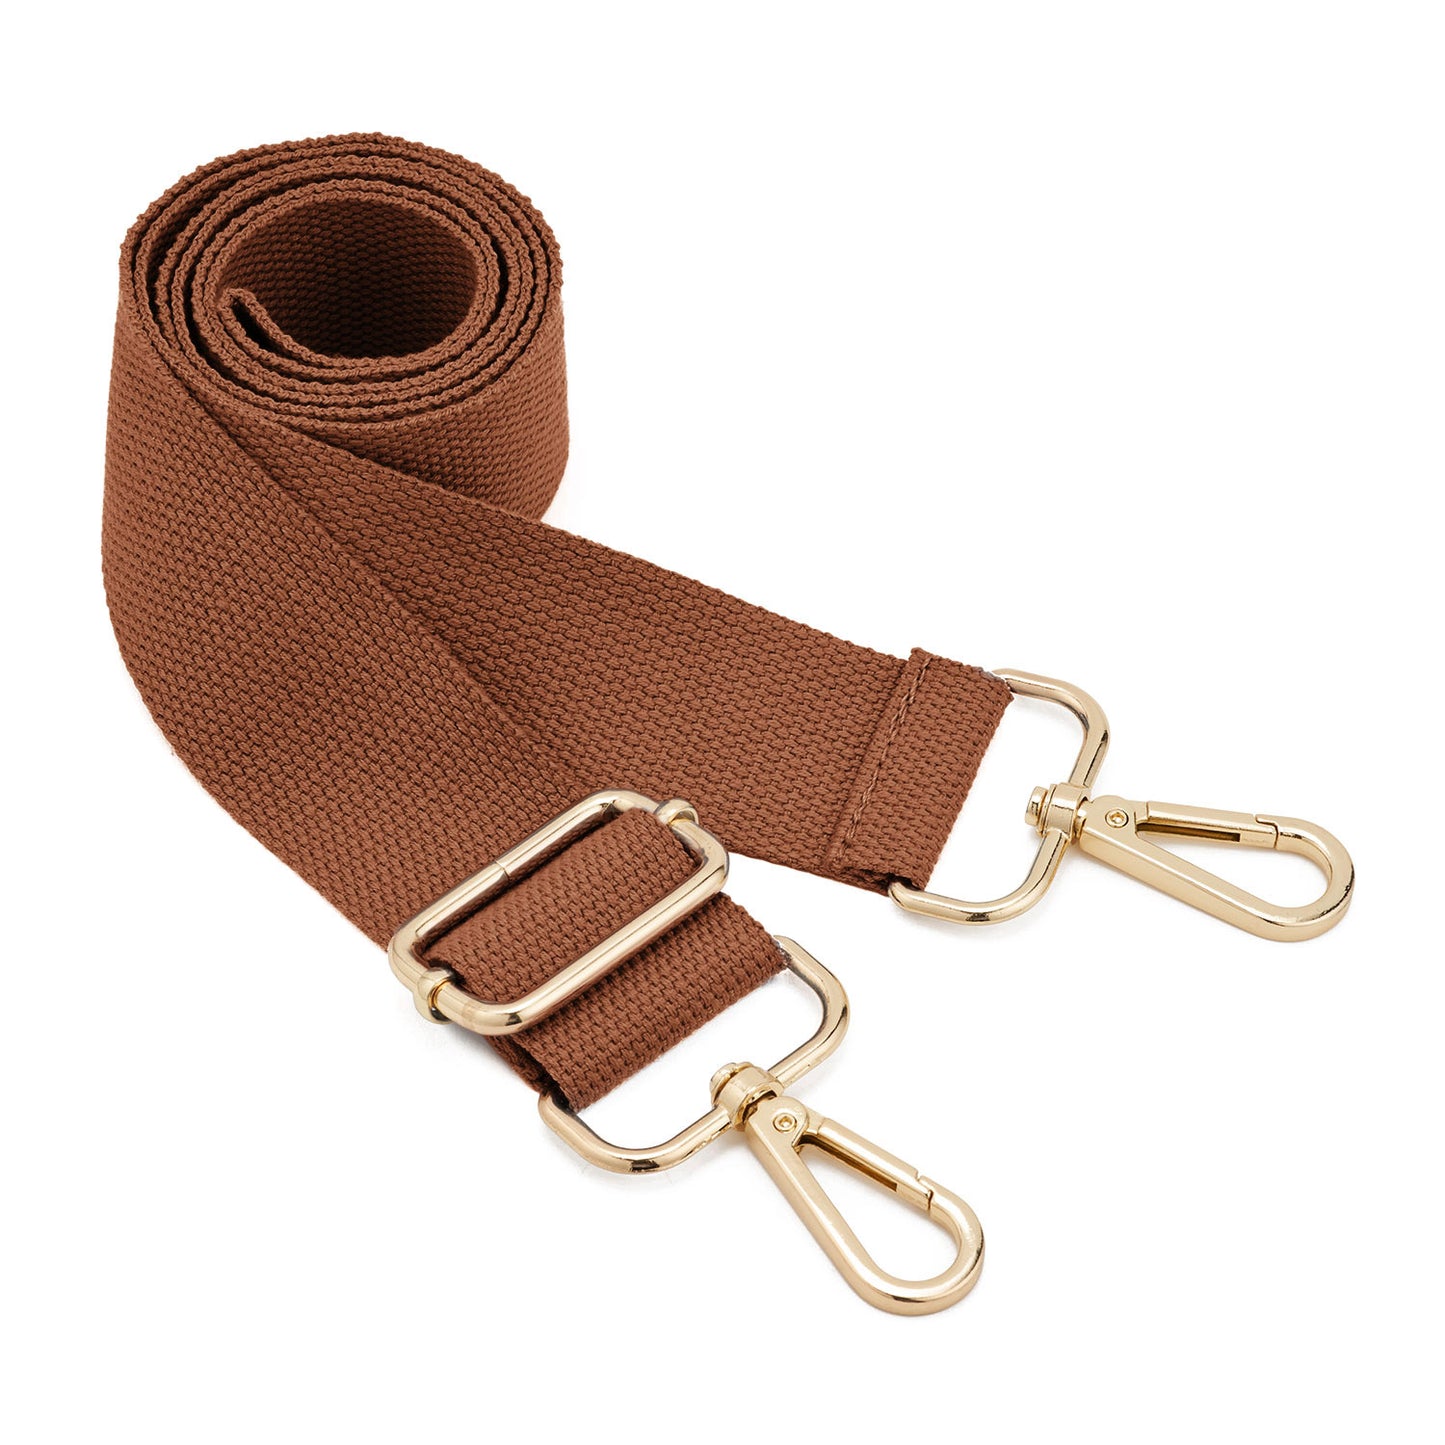 Purse Strap Universal Adjustable with No Punching Buckle Bag Shoulder Strap  Cross Body Strap for Small Bag Briefcase Purse DIY Modification Brown 